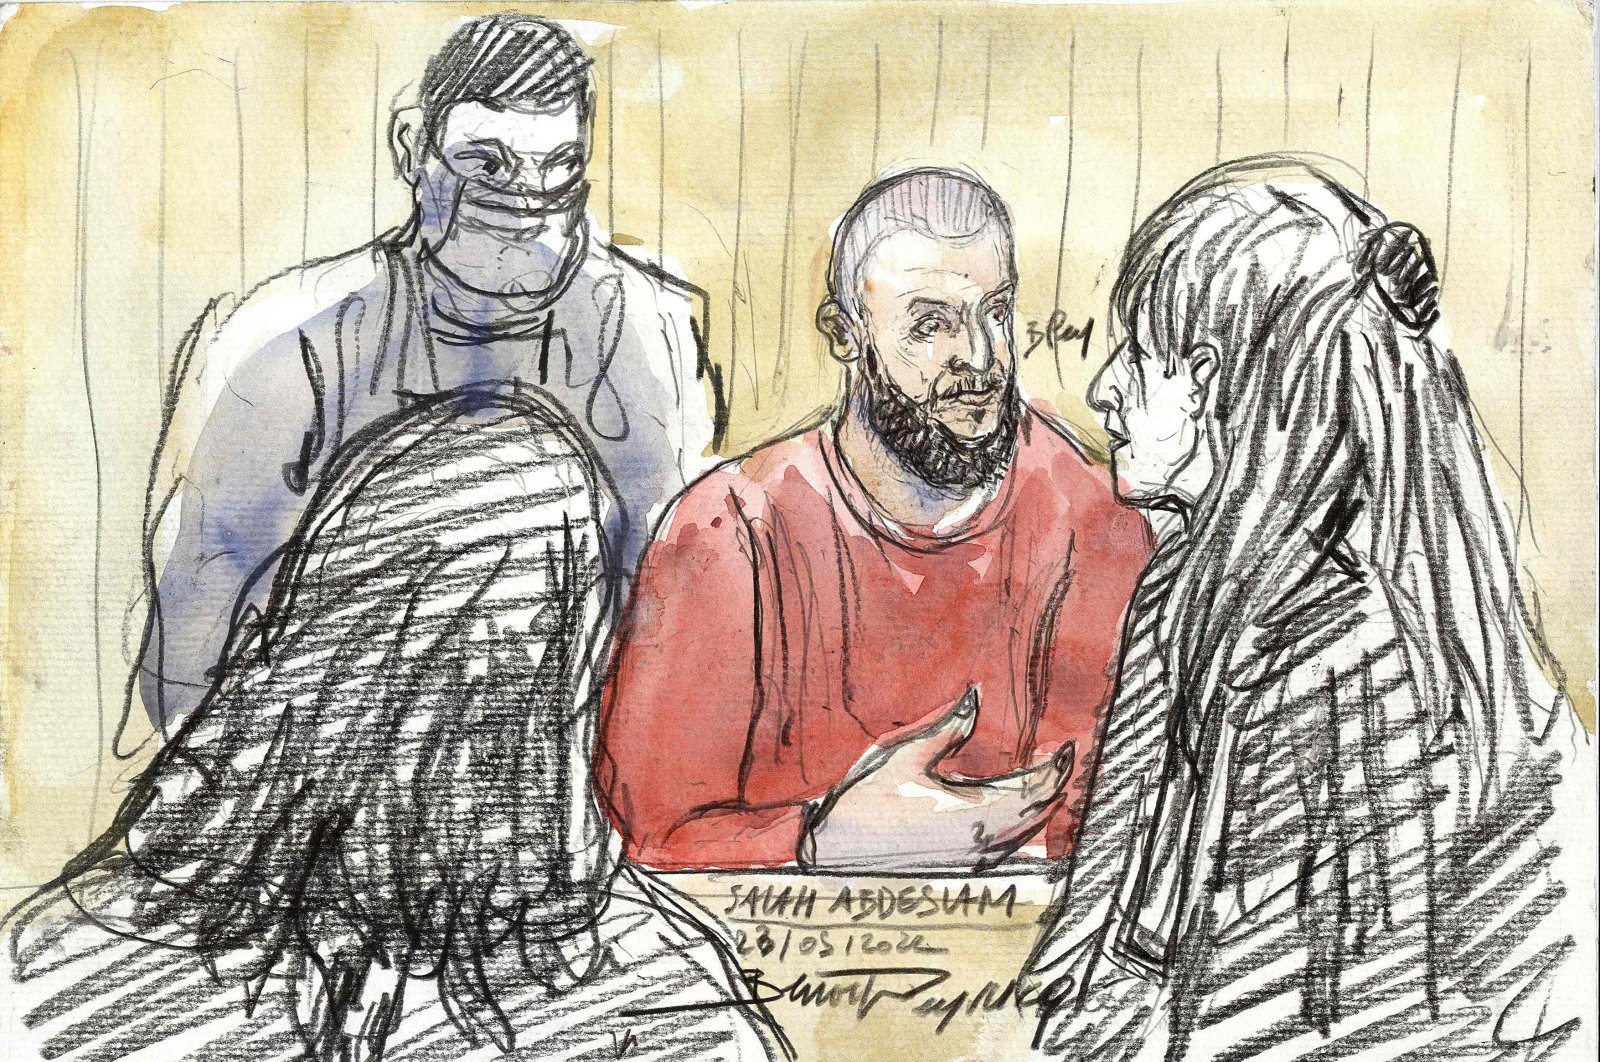 A sketch depicting defendant Salah Abdeslam (C), the prime suspect, standing in front of French lawyer Claire Josserand Schmidt (R) during the trial of the November 2015 terrorist attacks that saw 130 people killed, Palais de Justice courthouse, Paris, France, May 23, 2022. (AFP File Image)